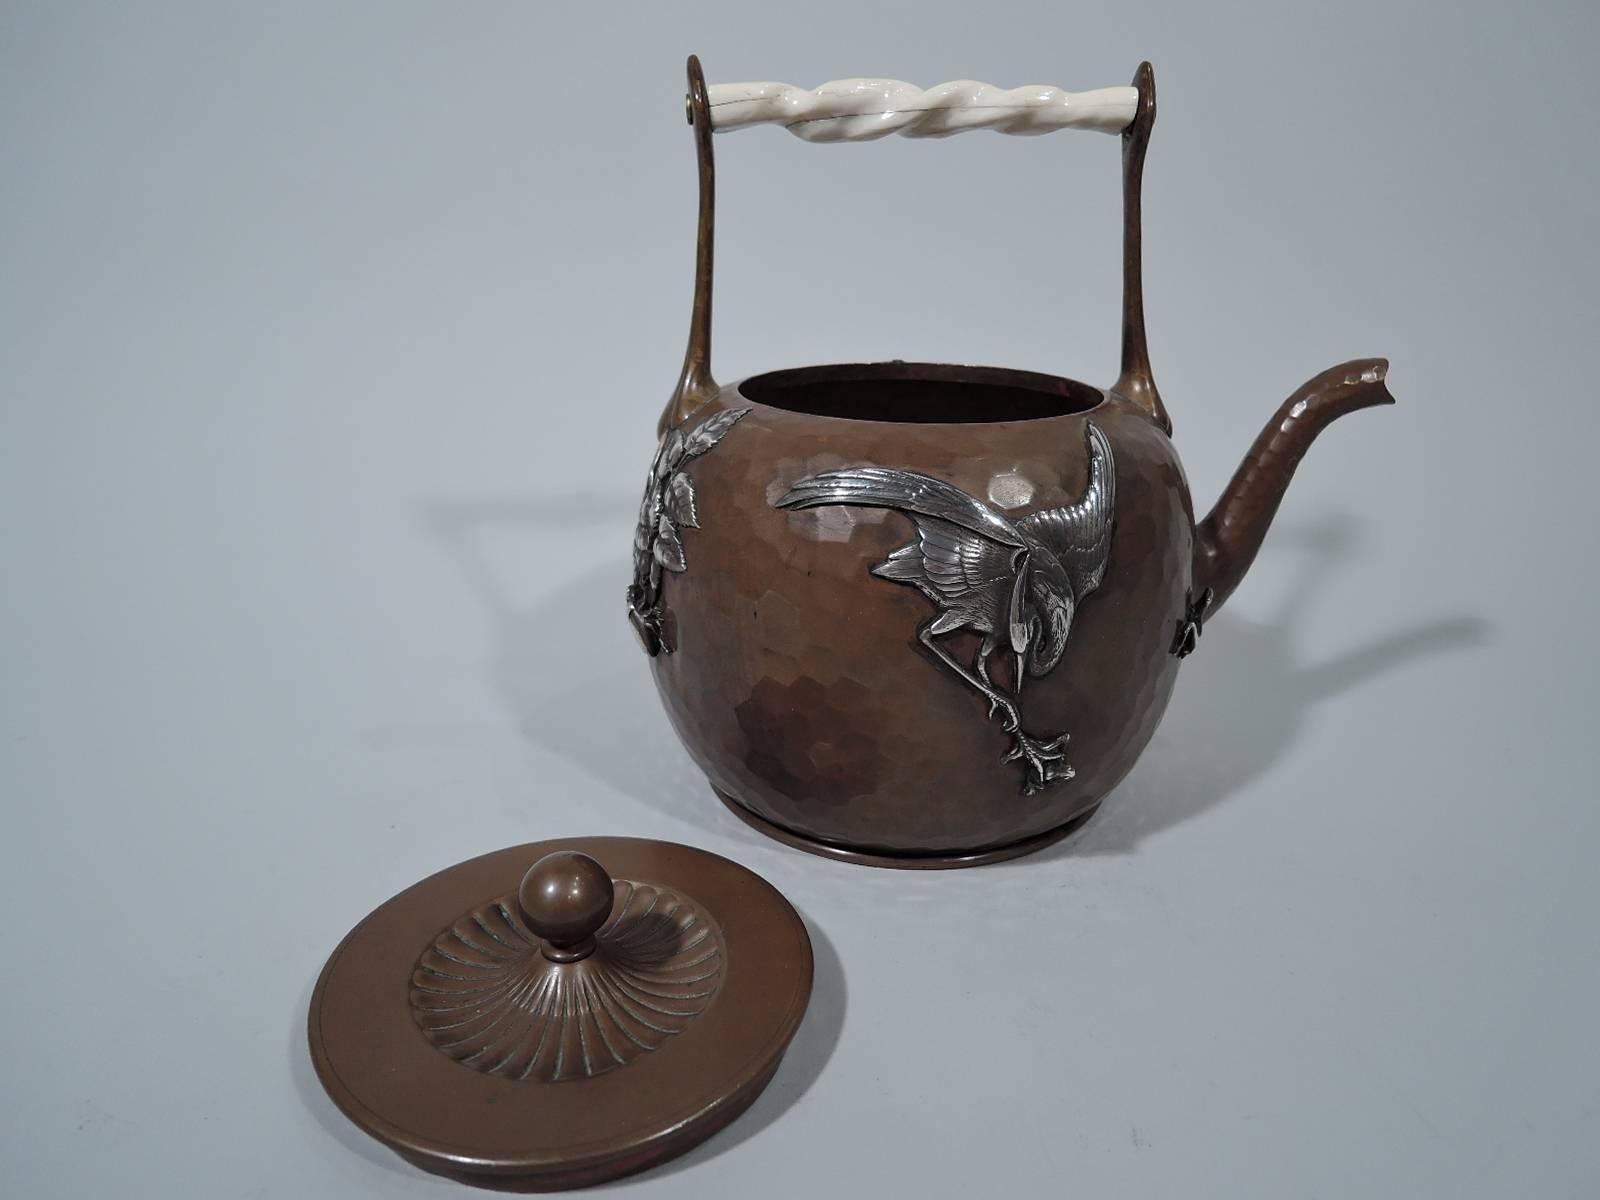 American Gorham Japonesque Mixed Metal and Hand-Hammered Copper Teapot